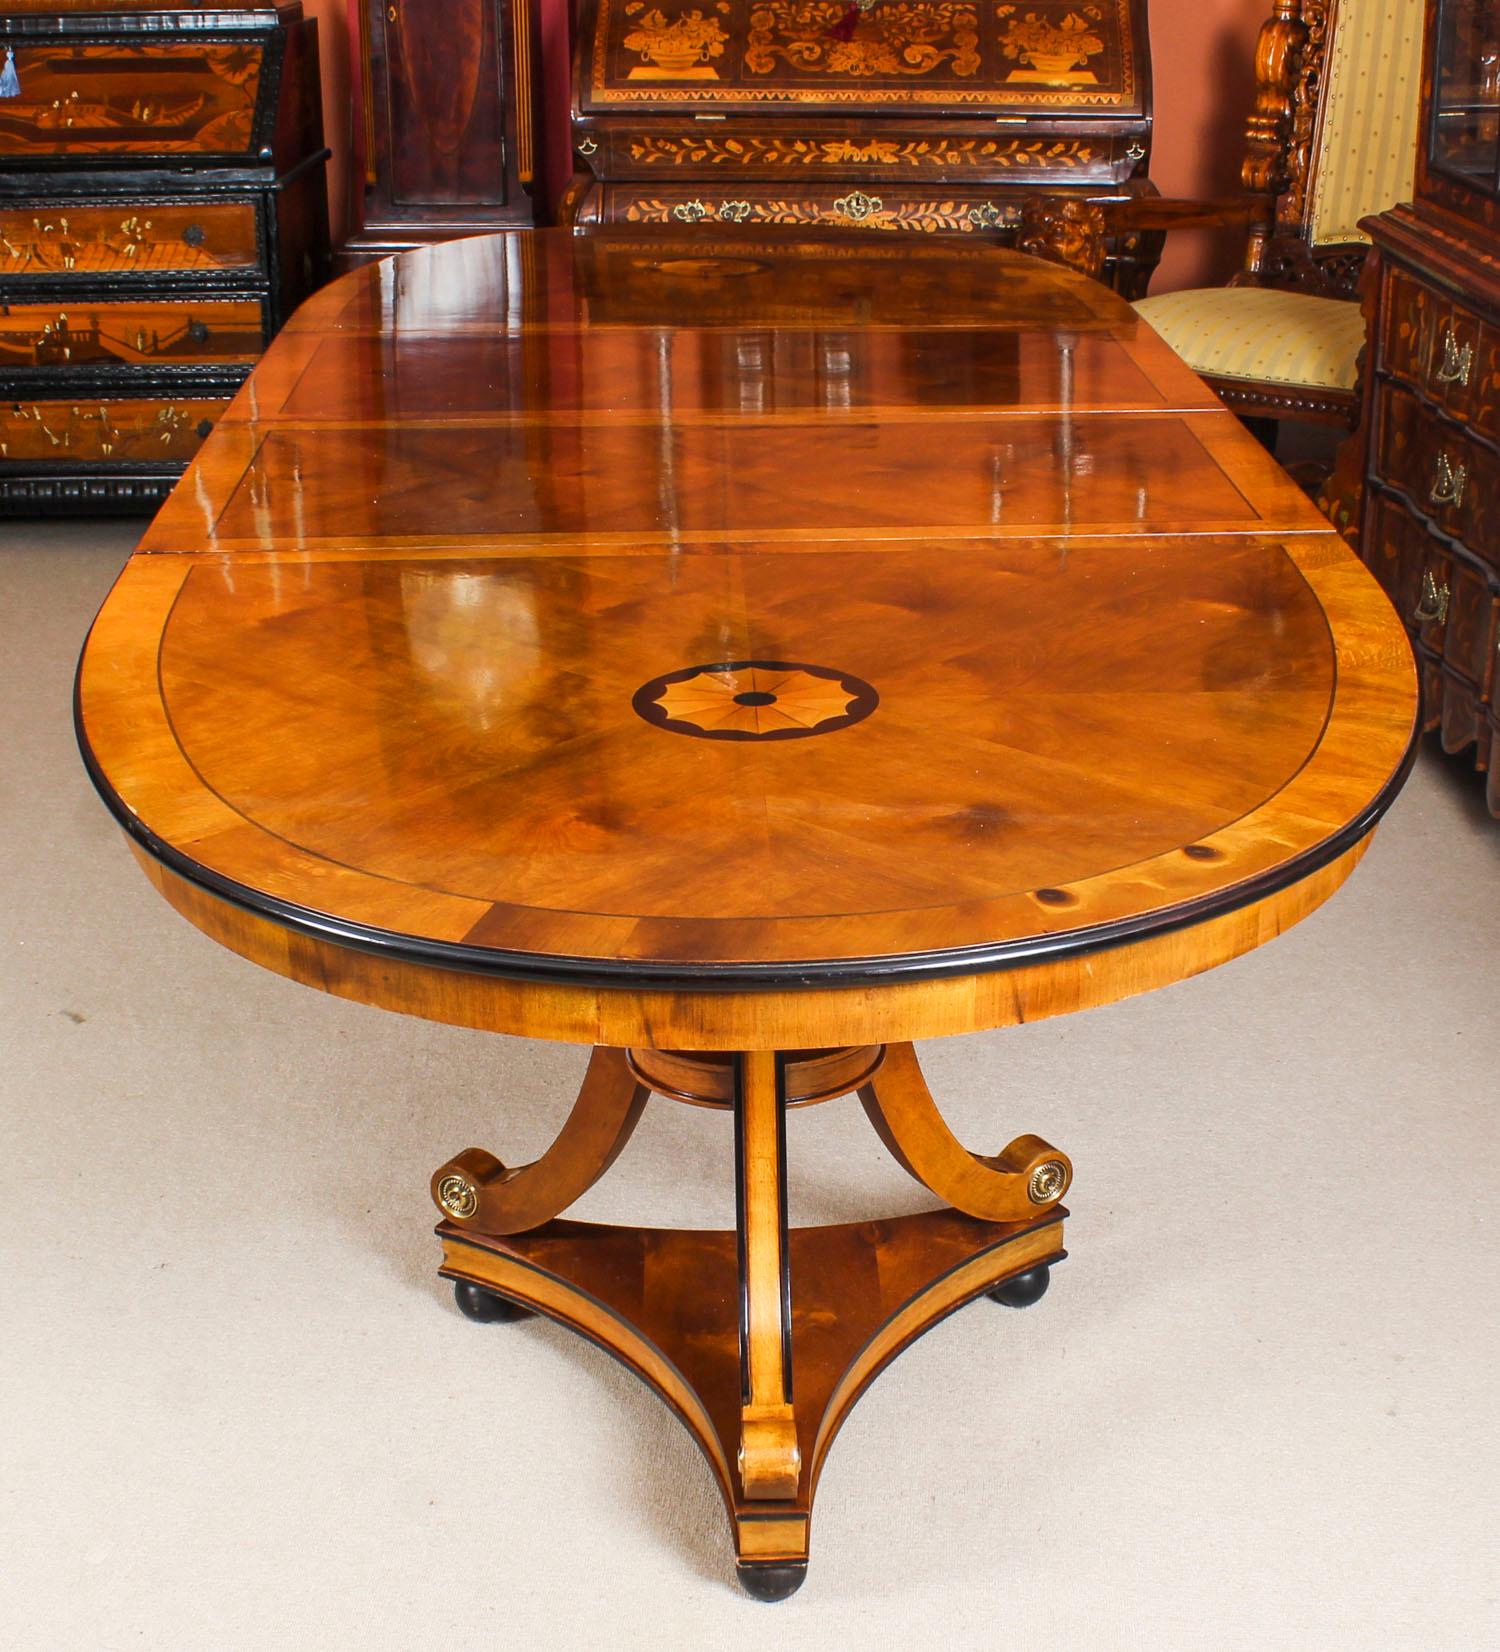 This is a fabulous high quality satin birch twin pillar oval dining table purchased at great expense from Harrods, Knightsbridge, London in the 1980s. Measures: 10ft 6”.

The oval top with inlaid circular satinwood and ebonized shell marquetry